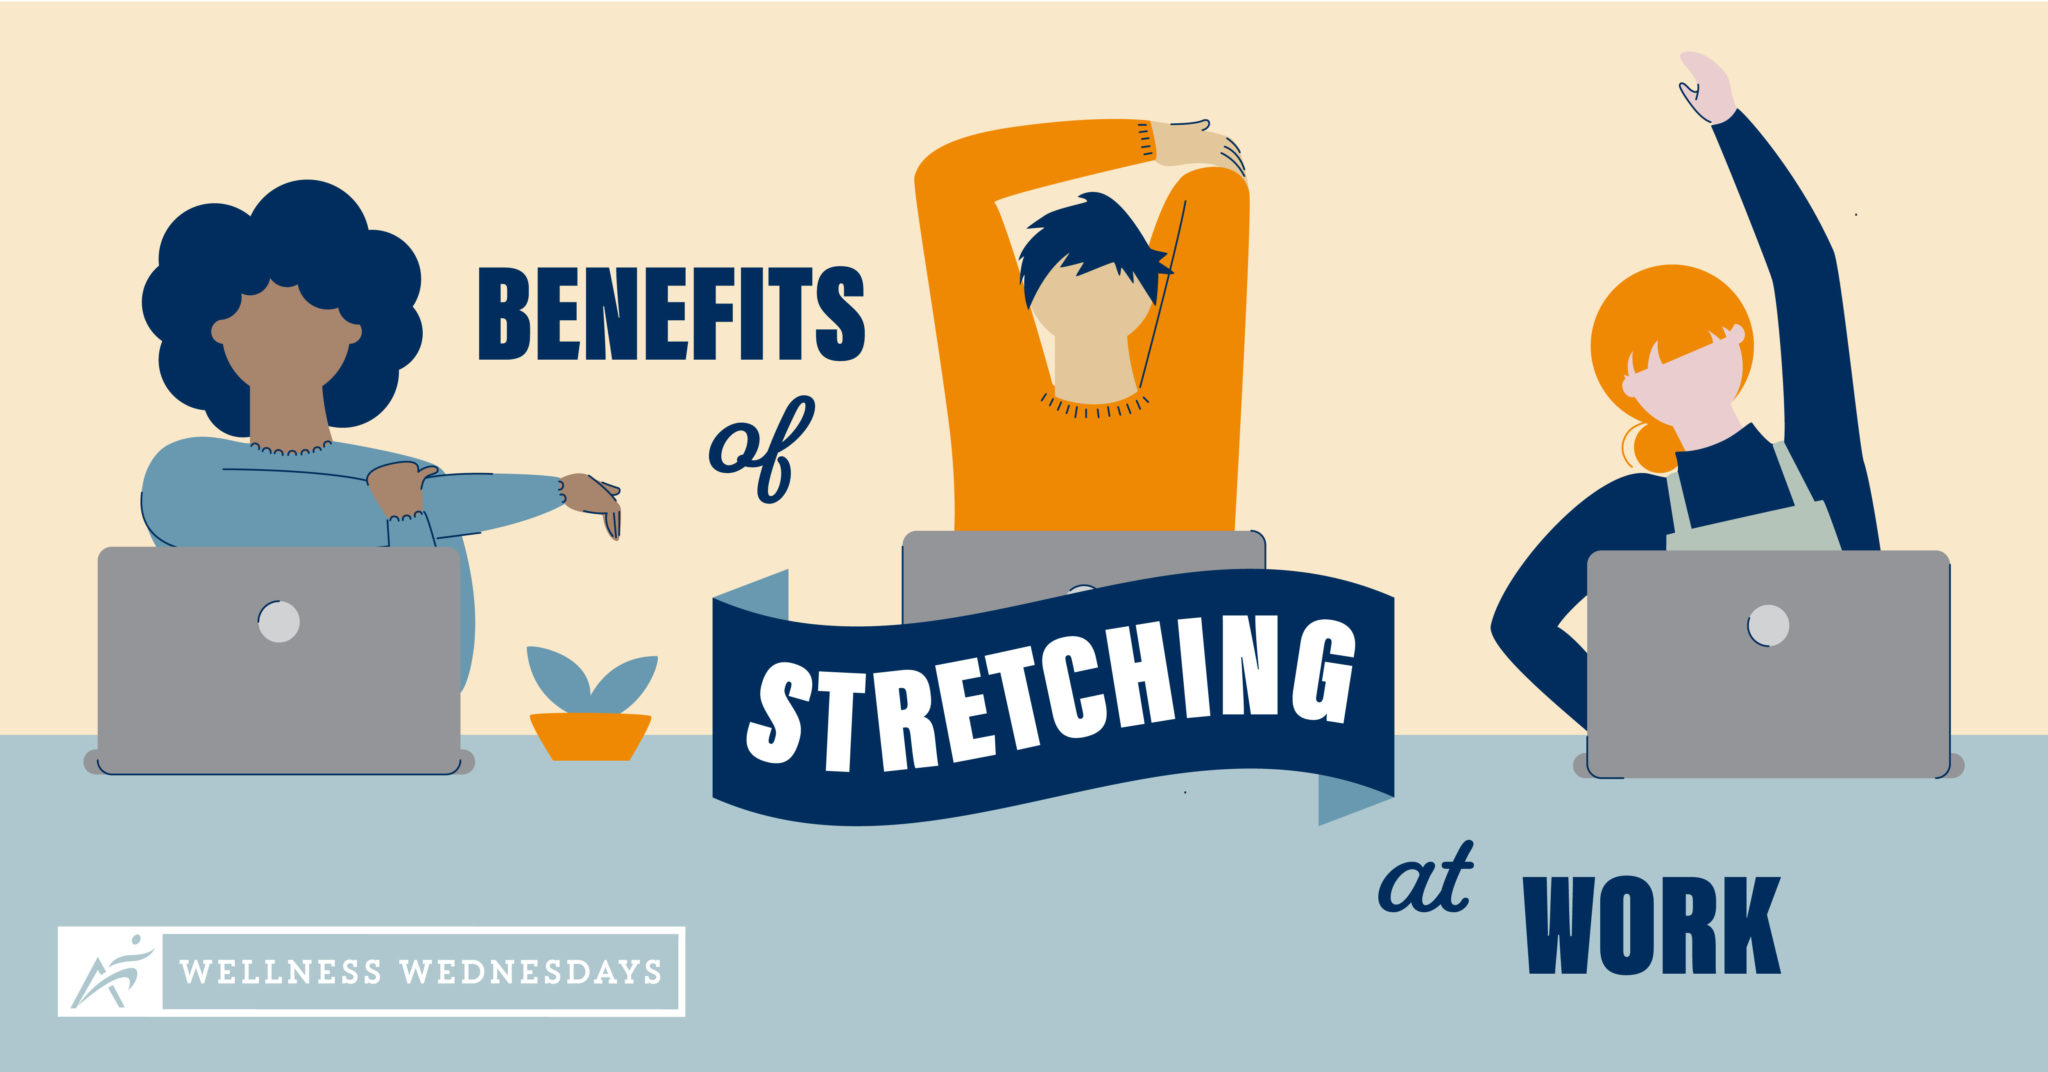 Benefits of Stretching at Work